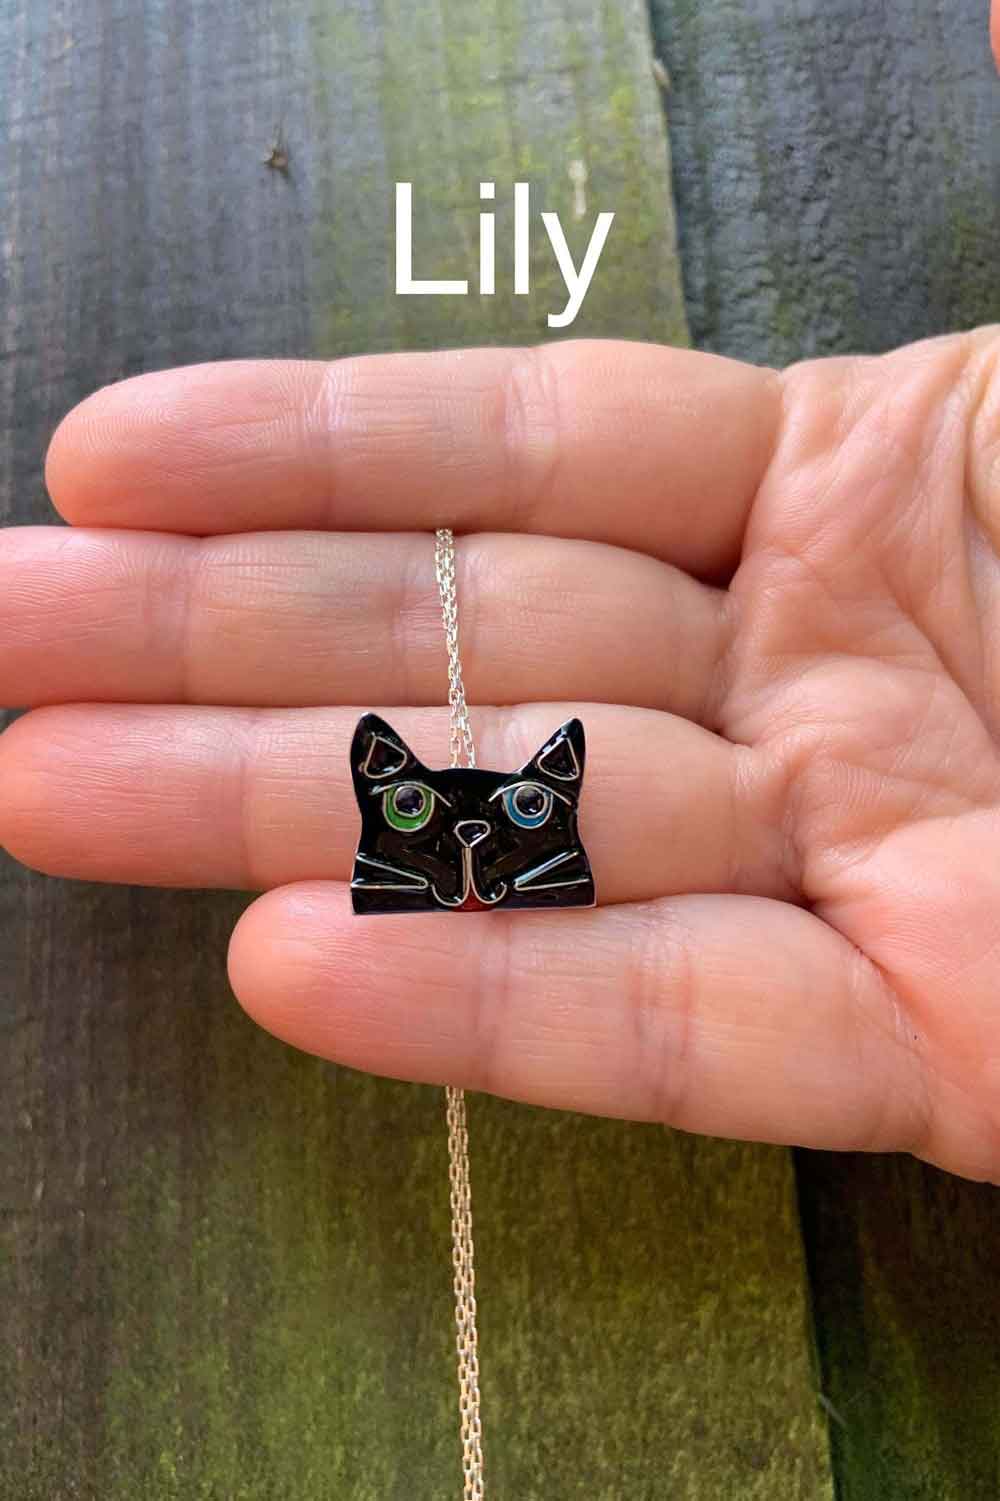 CLOISONNE ENAMEL SILVER Necklace, Cat Lover Necklace, Birthday Gifts, Love Handmade Jewelry, 925 Sterling Silver